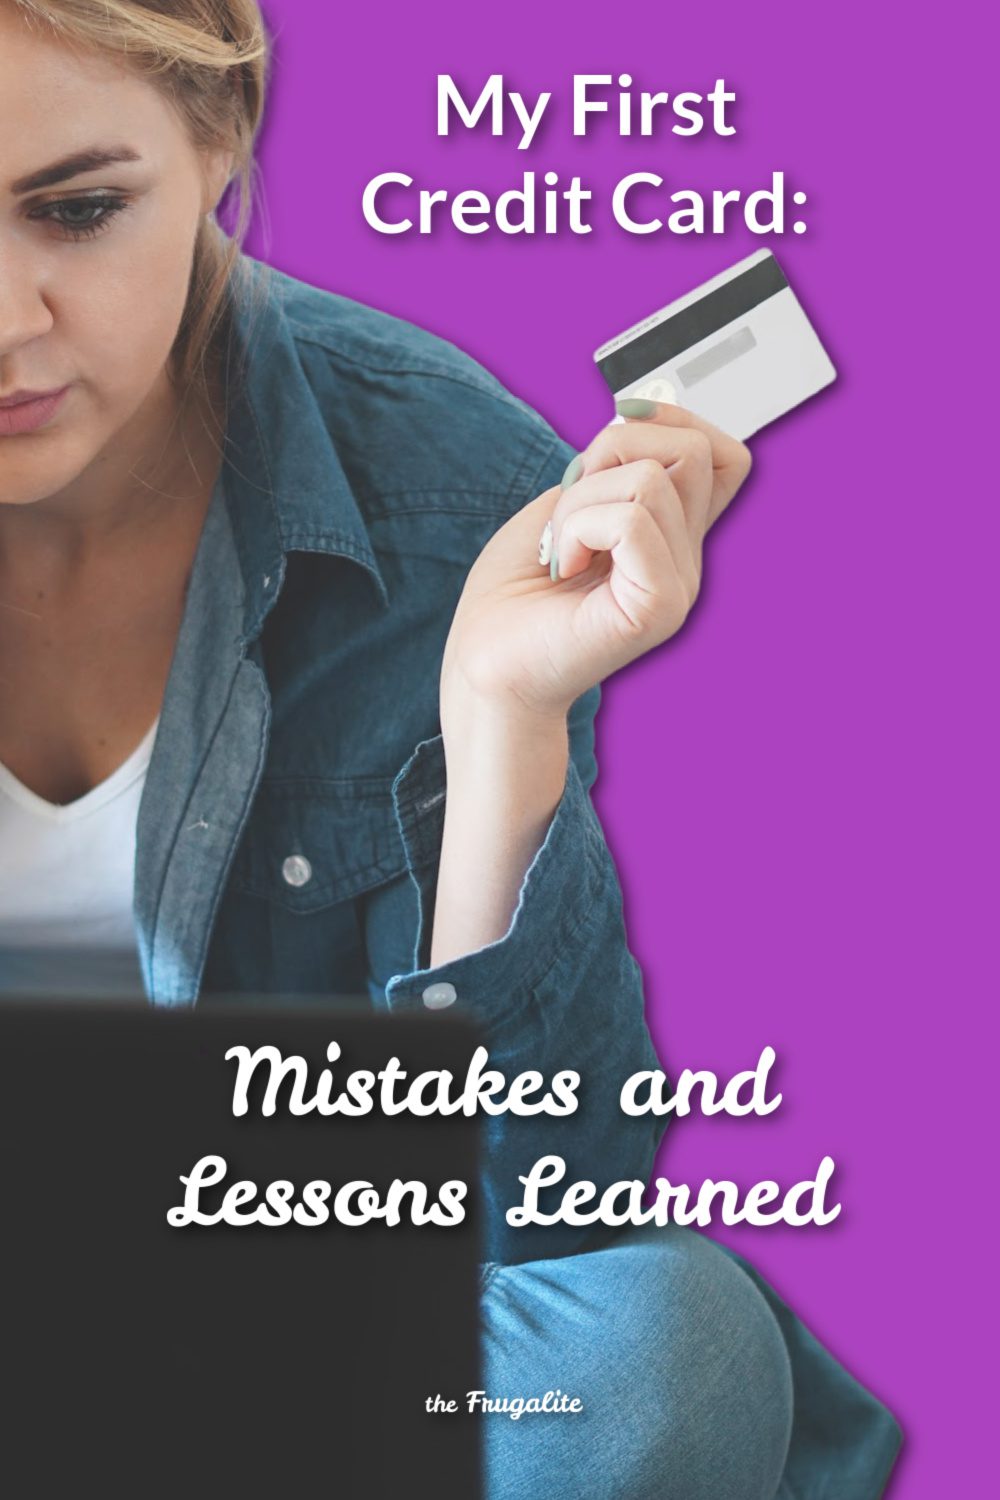 My First Credit Card: Mistakes and Lessons Learned